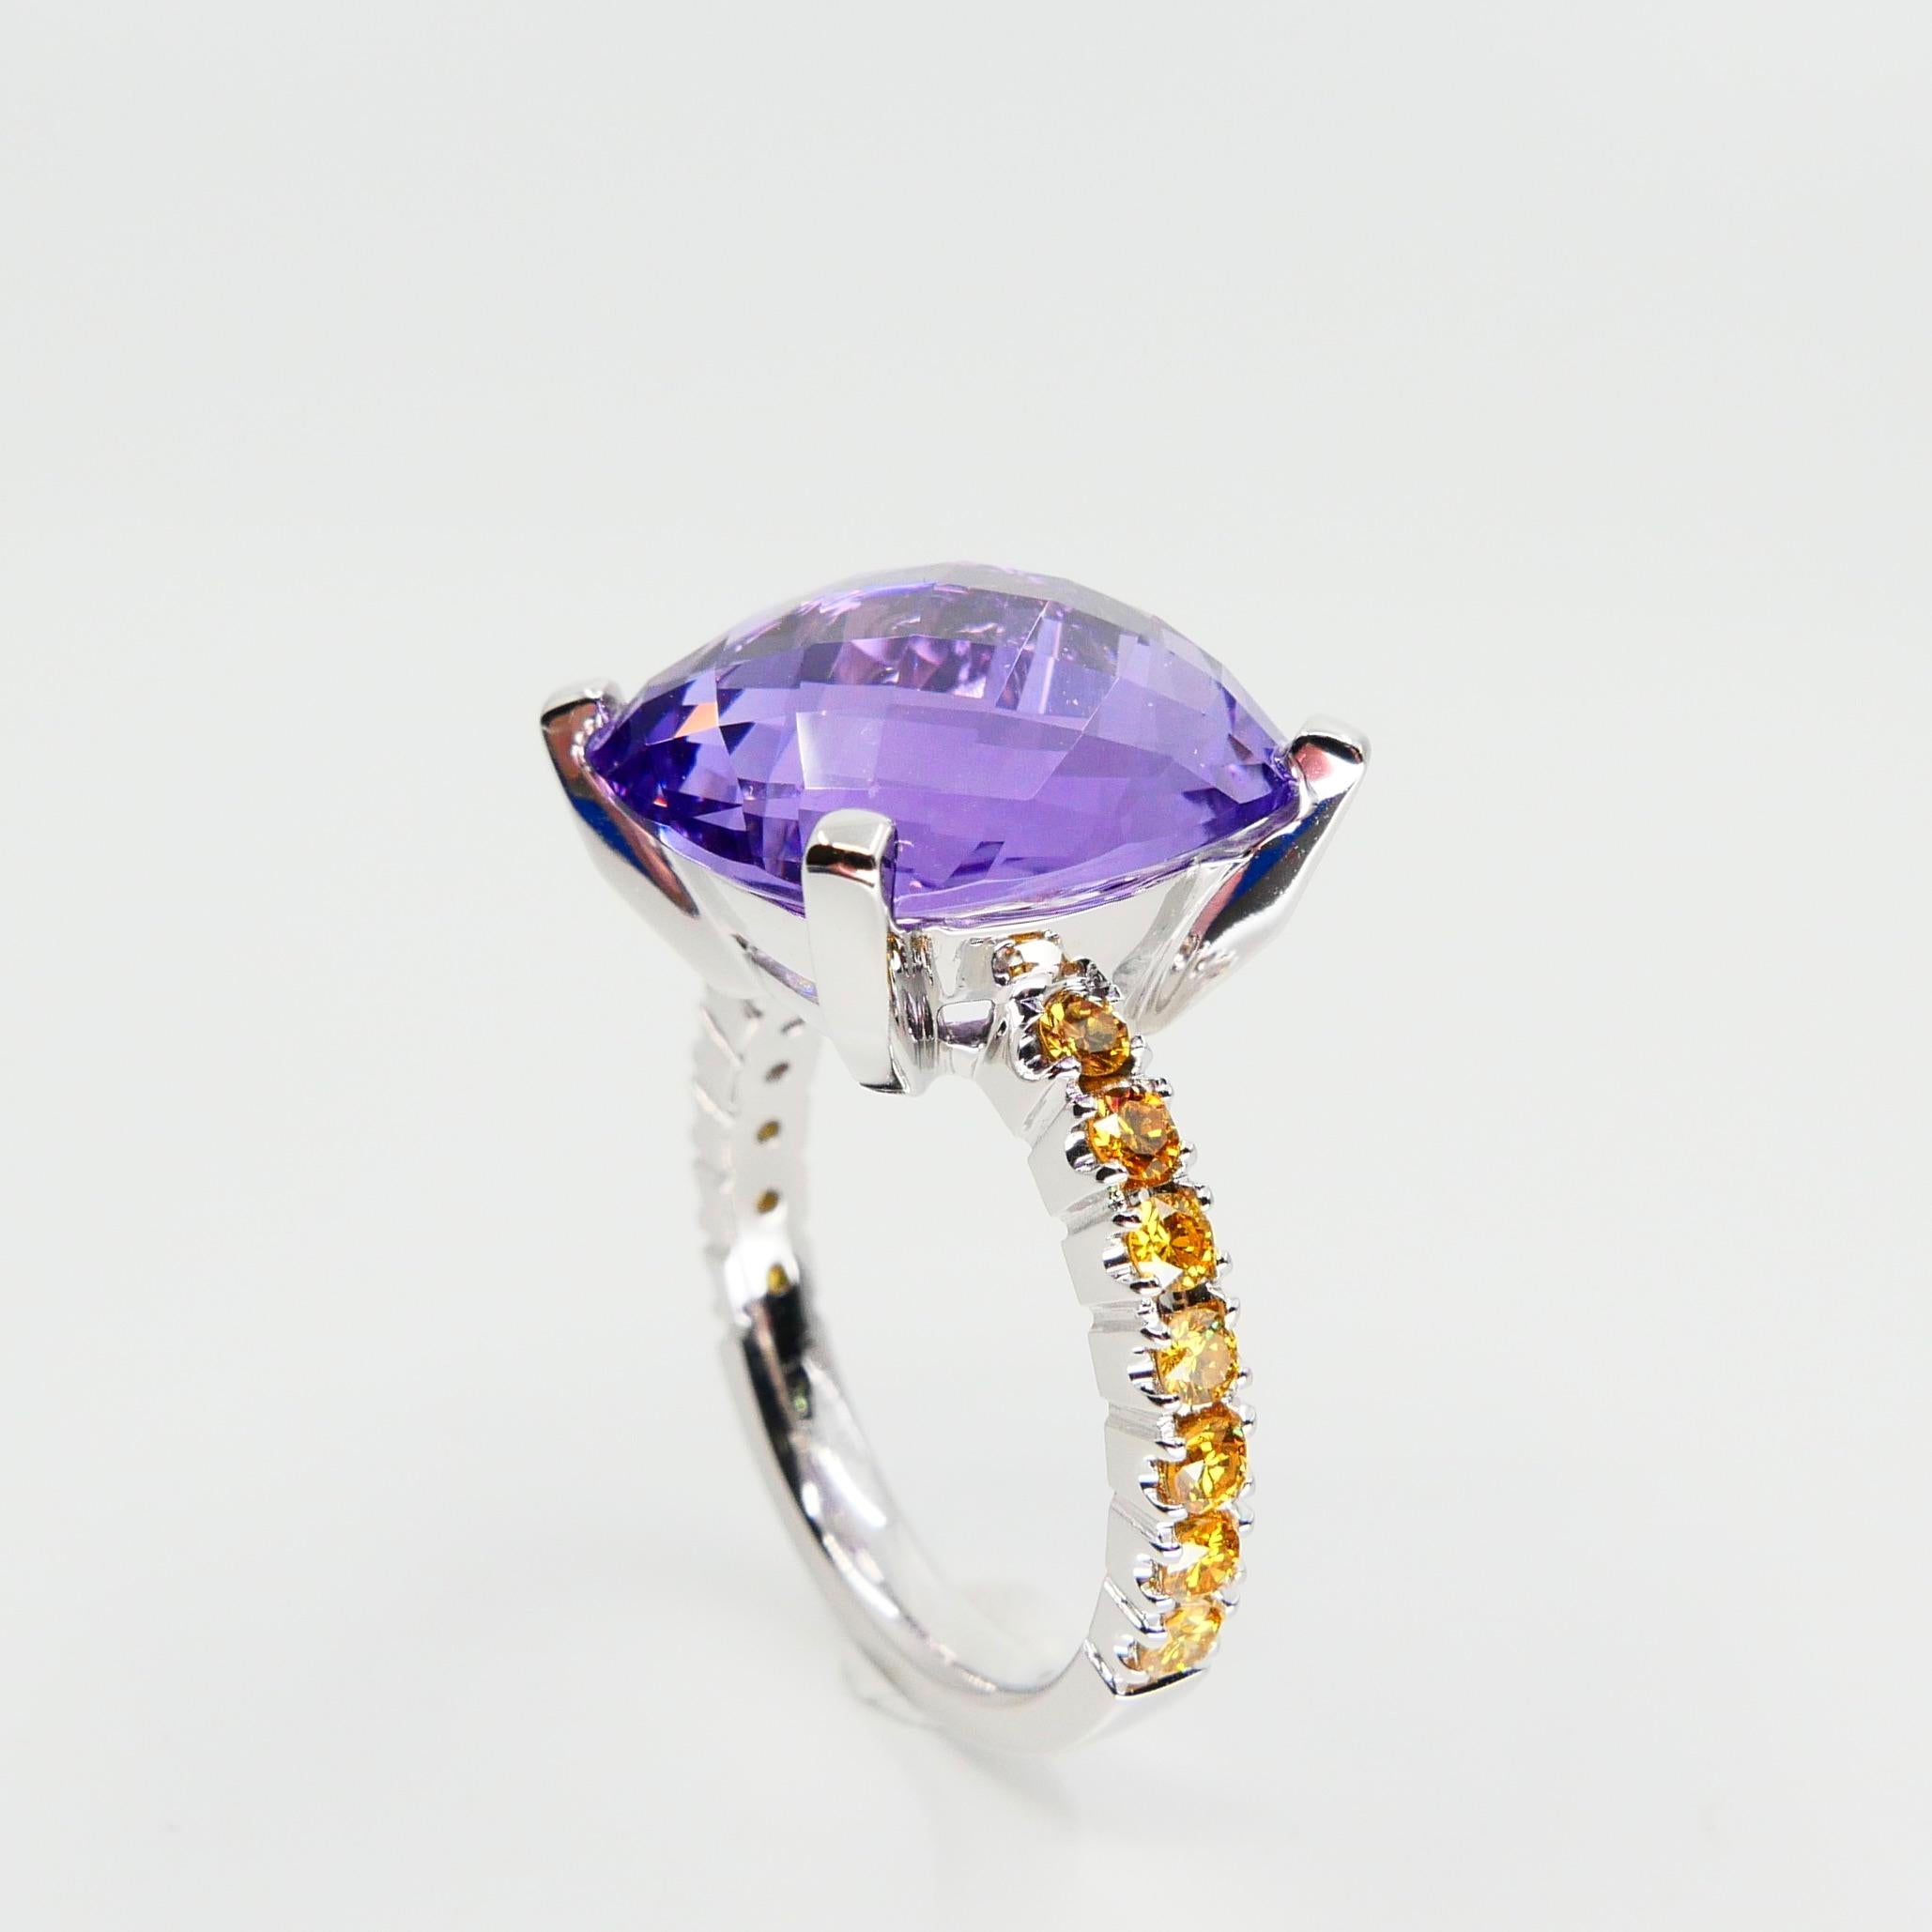 8.70 Carat Amethyst Cocktail Ring with Fancy Vivid Yellow Diamonds, Statement For Sale 9